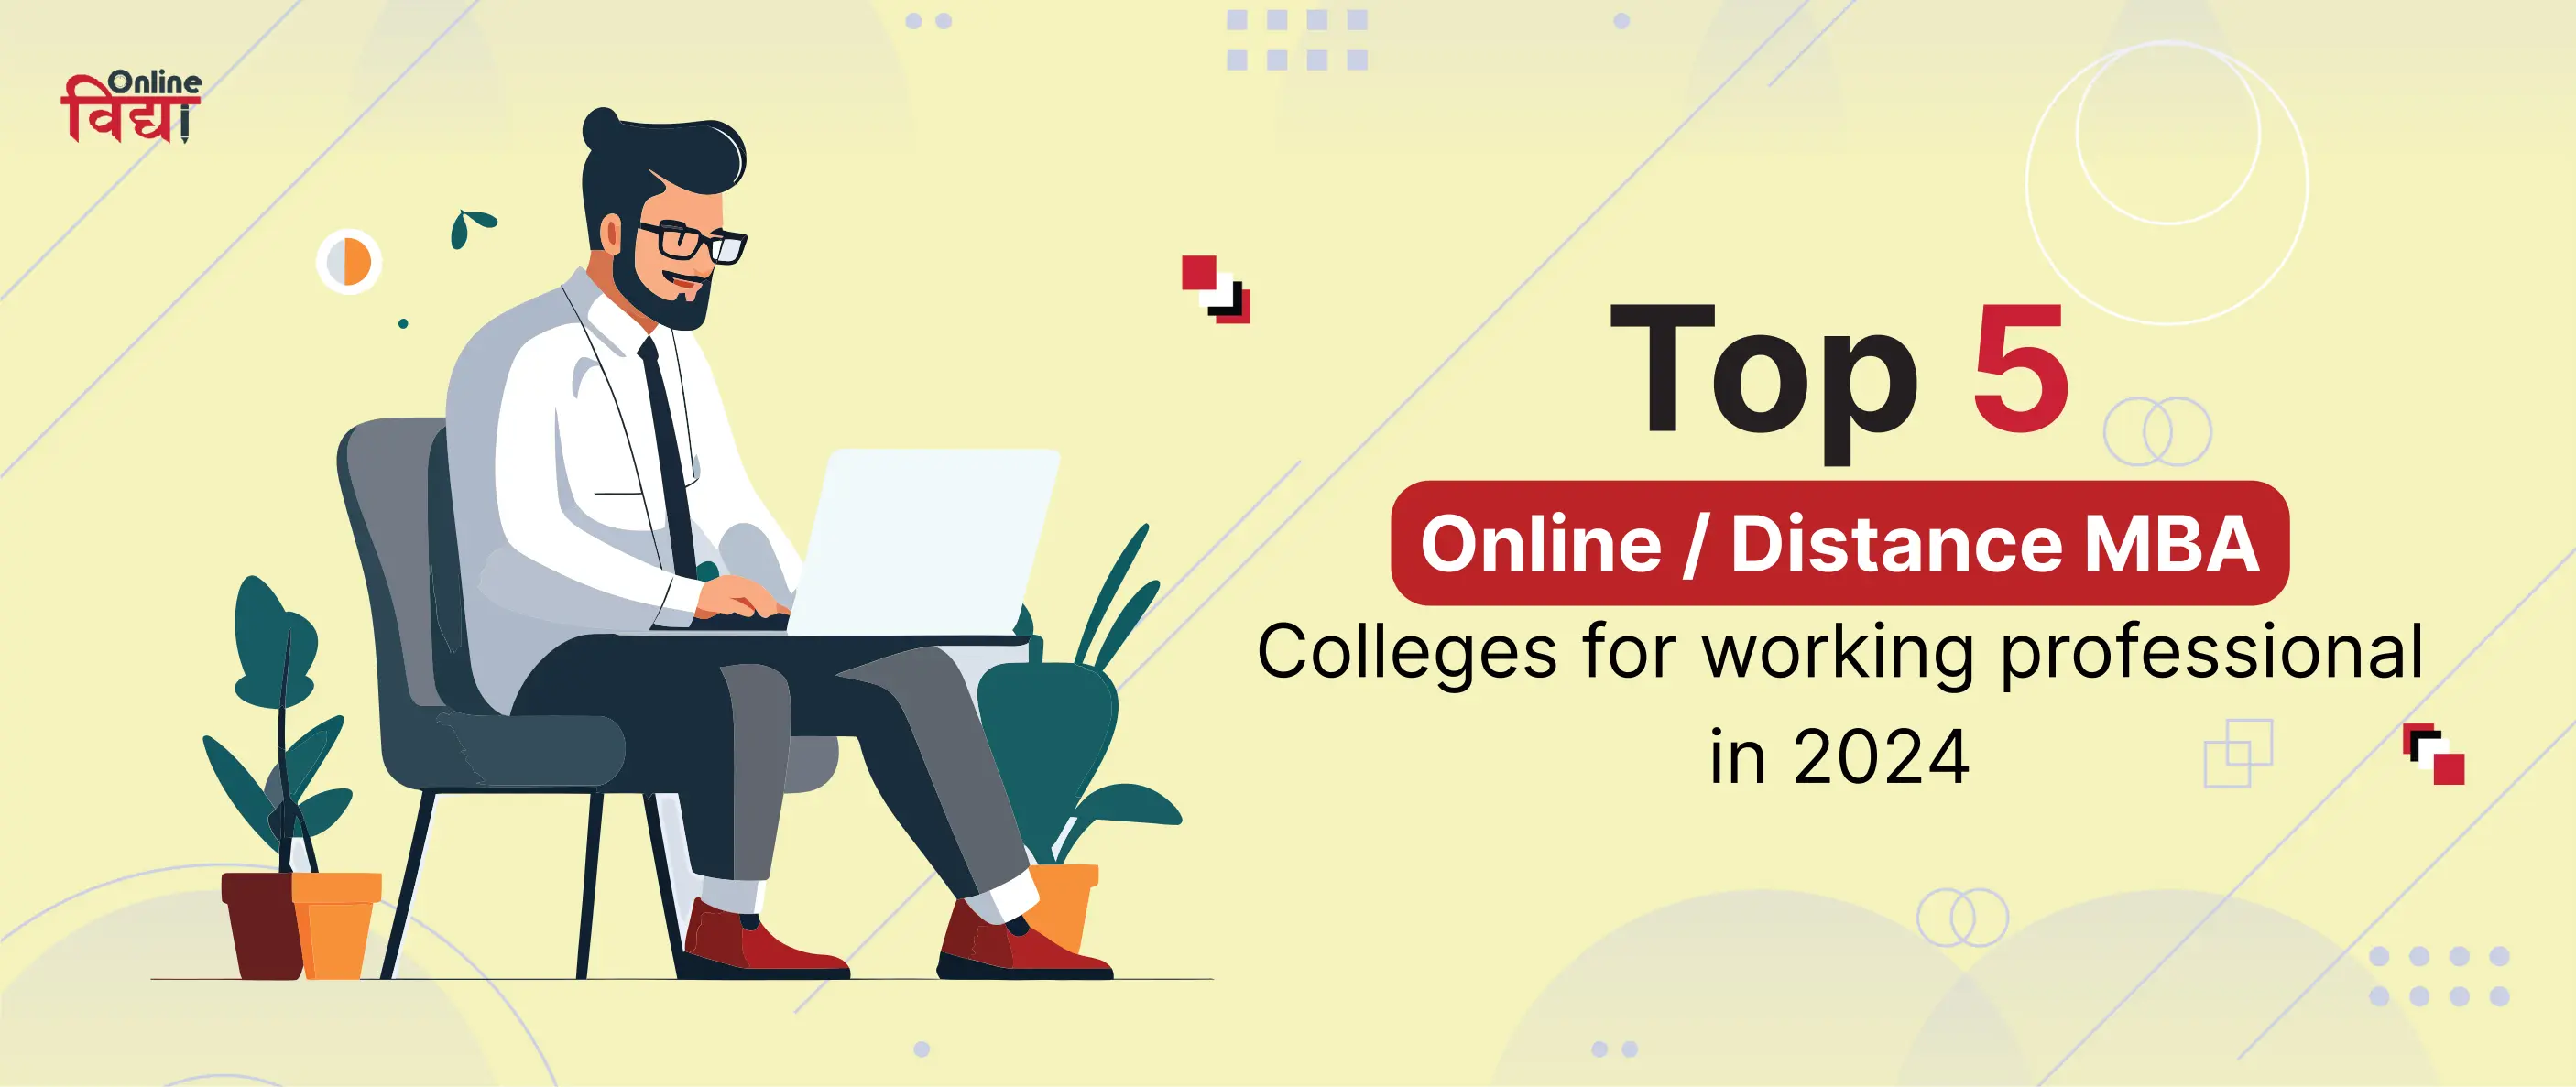 Top 5 online /Distance MBA Colleges for working professionals in 2024